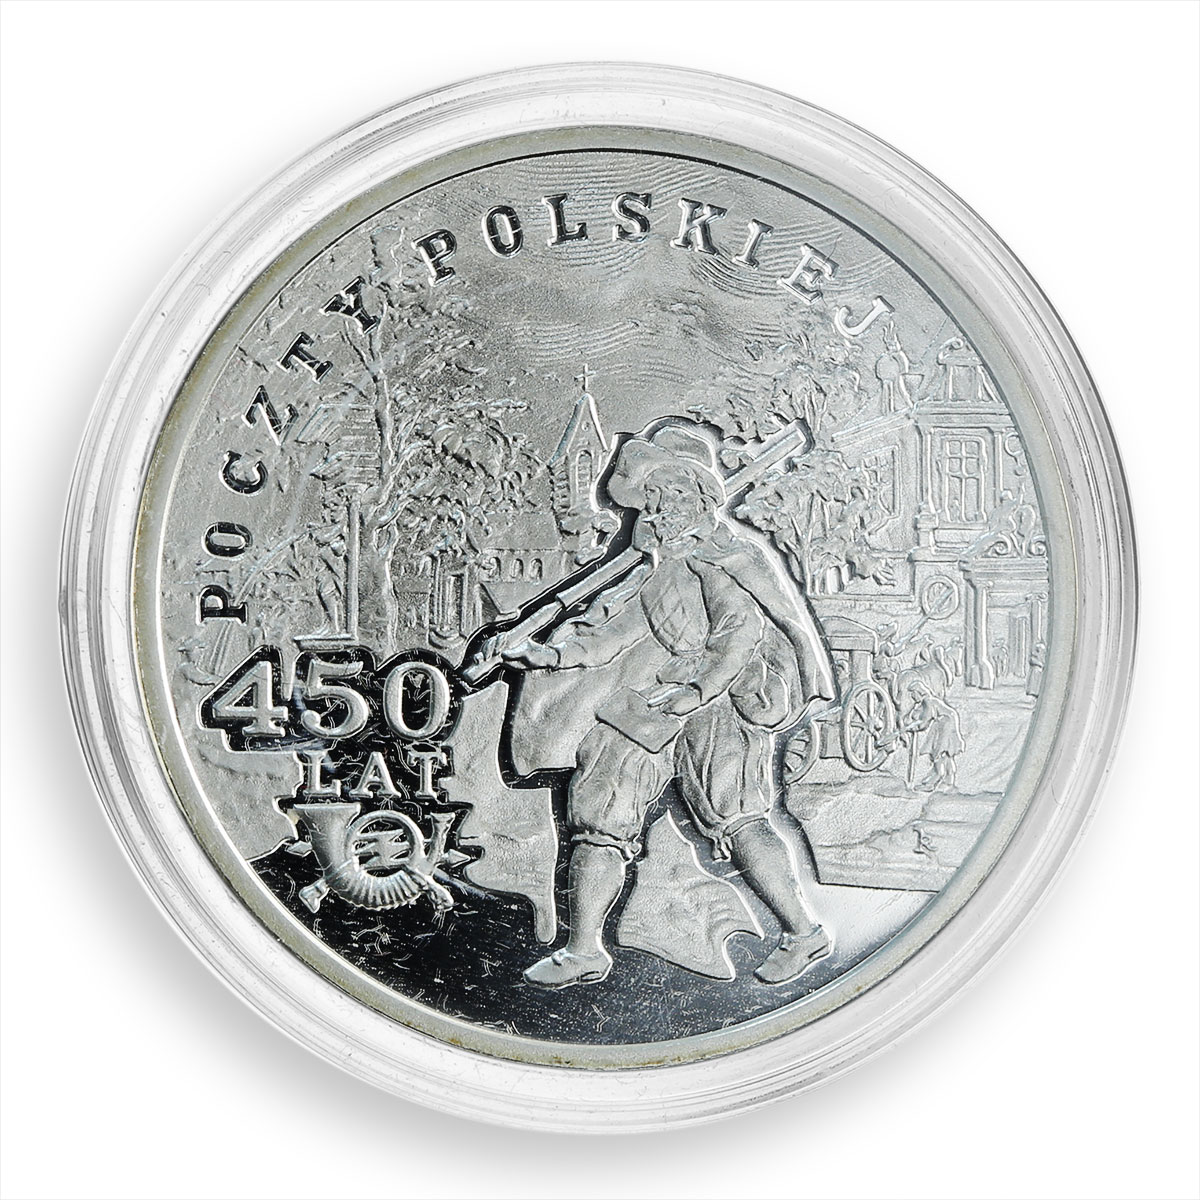 Poland, 10 zlotys, 450 Years Polish Post Office, stamp, rider, silver coin, 2008